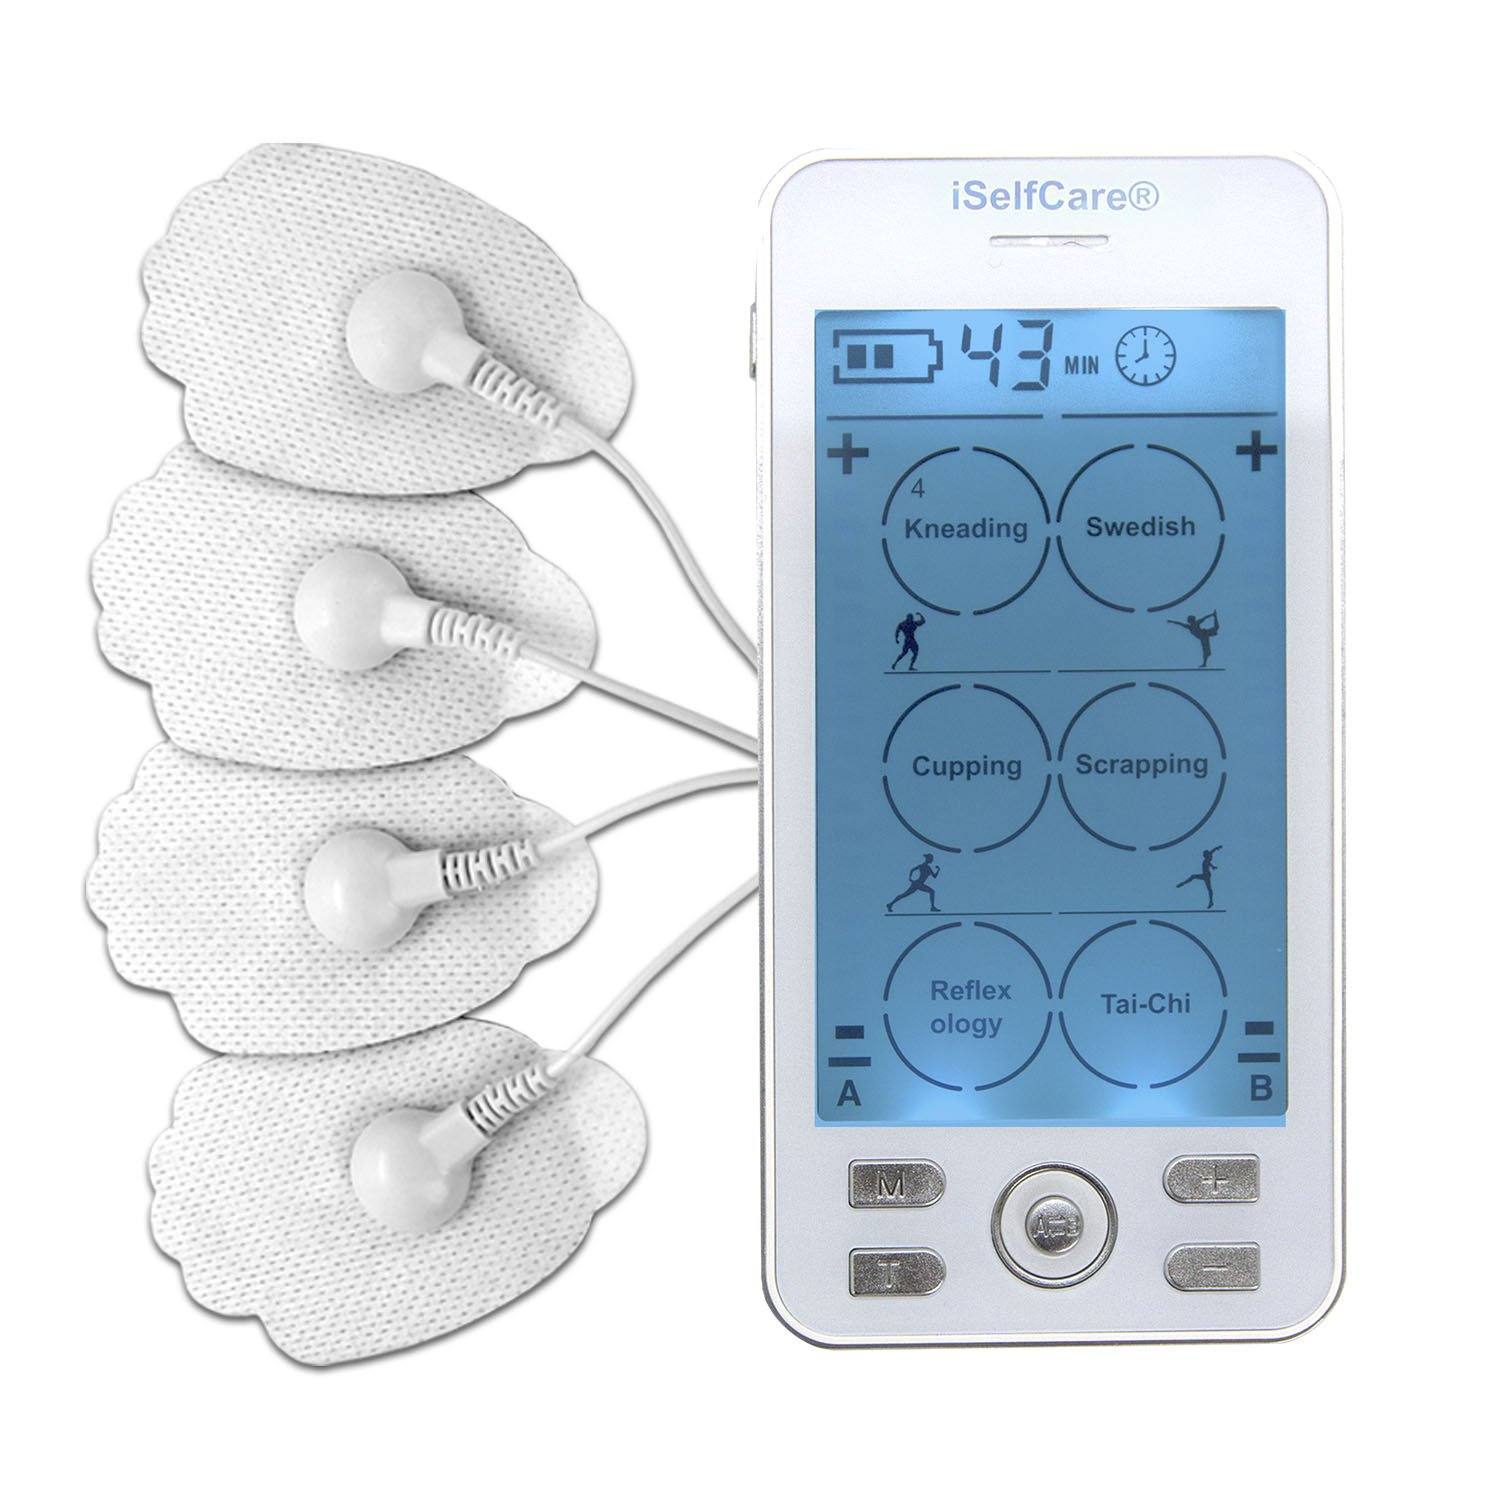 TechCare Plus 24 Review: How Simple And Effective Is This TENS Unit?